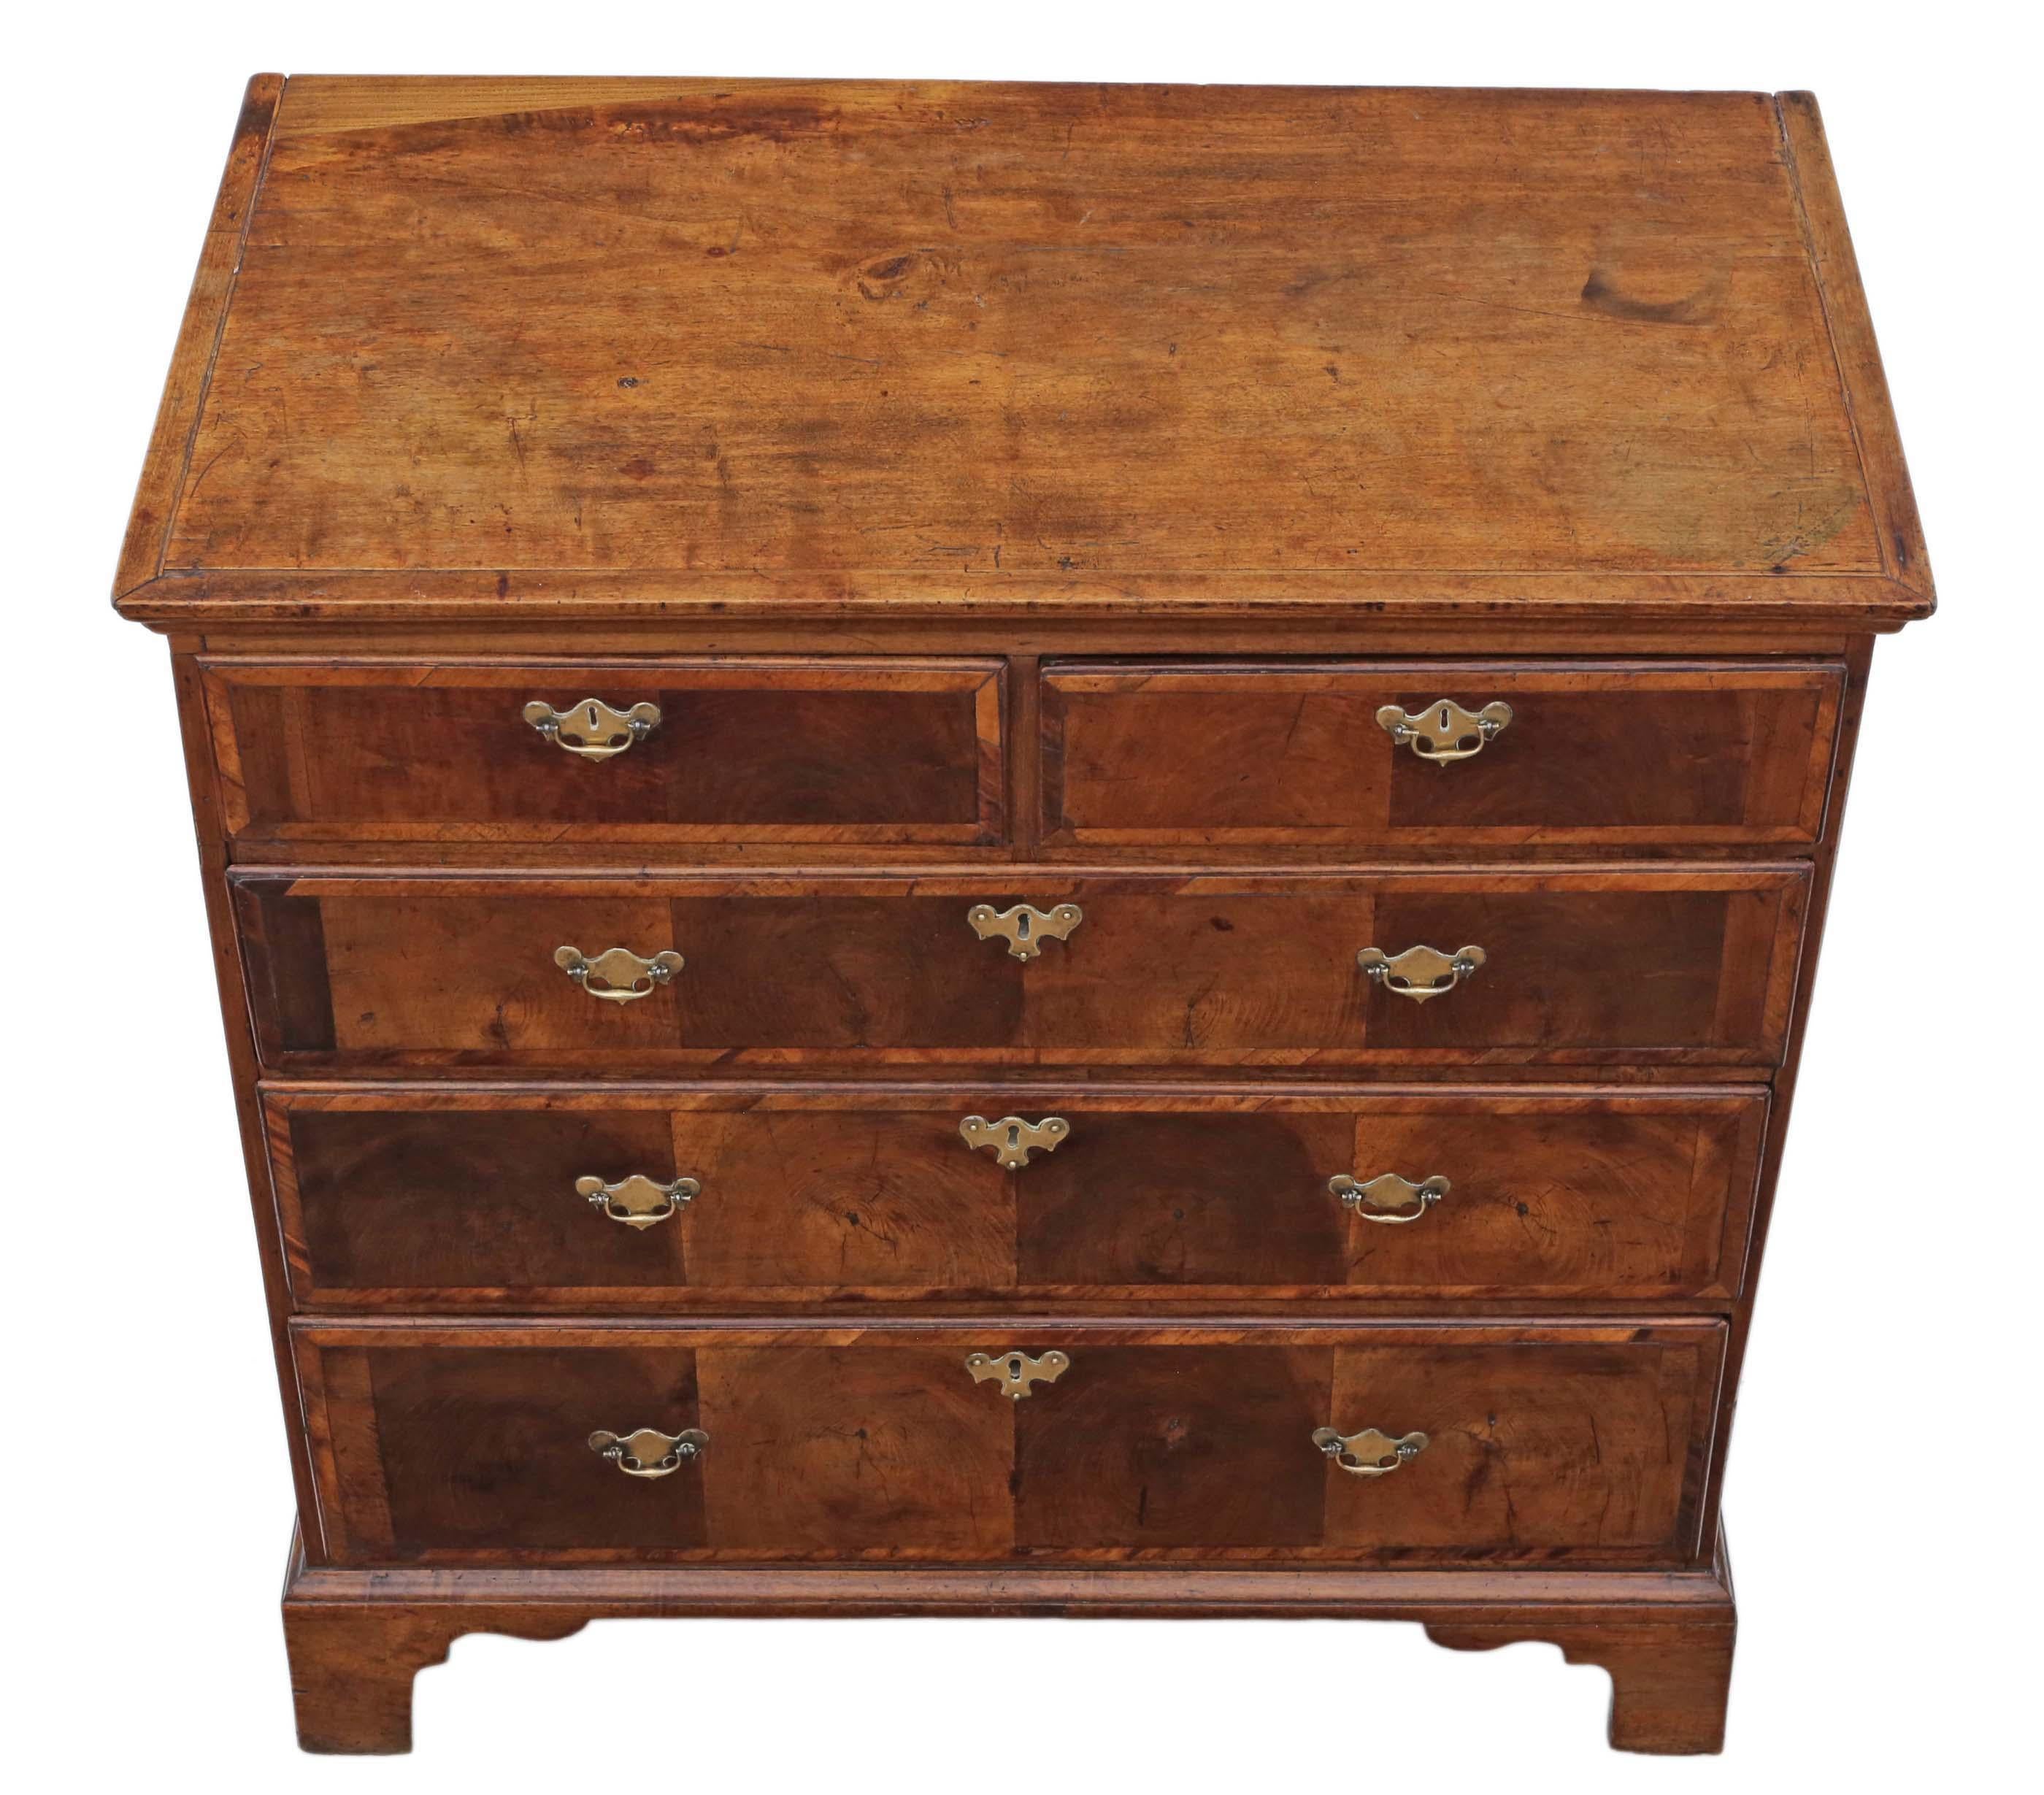 Antique Georgian 18th Century Oyster Walnut and Fruitwood Chest of Drawers In Good Condition For Sale In Wisbech, Cambridgeshire